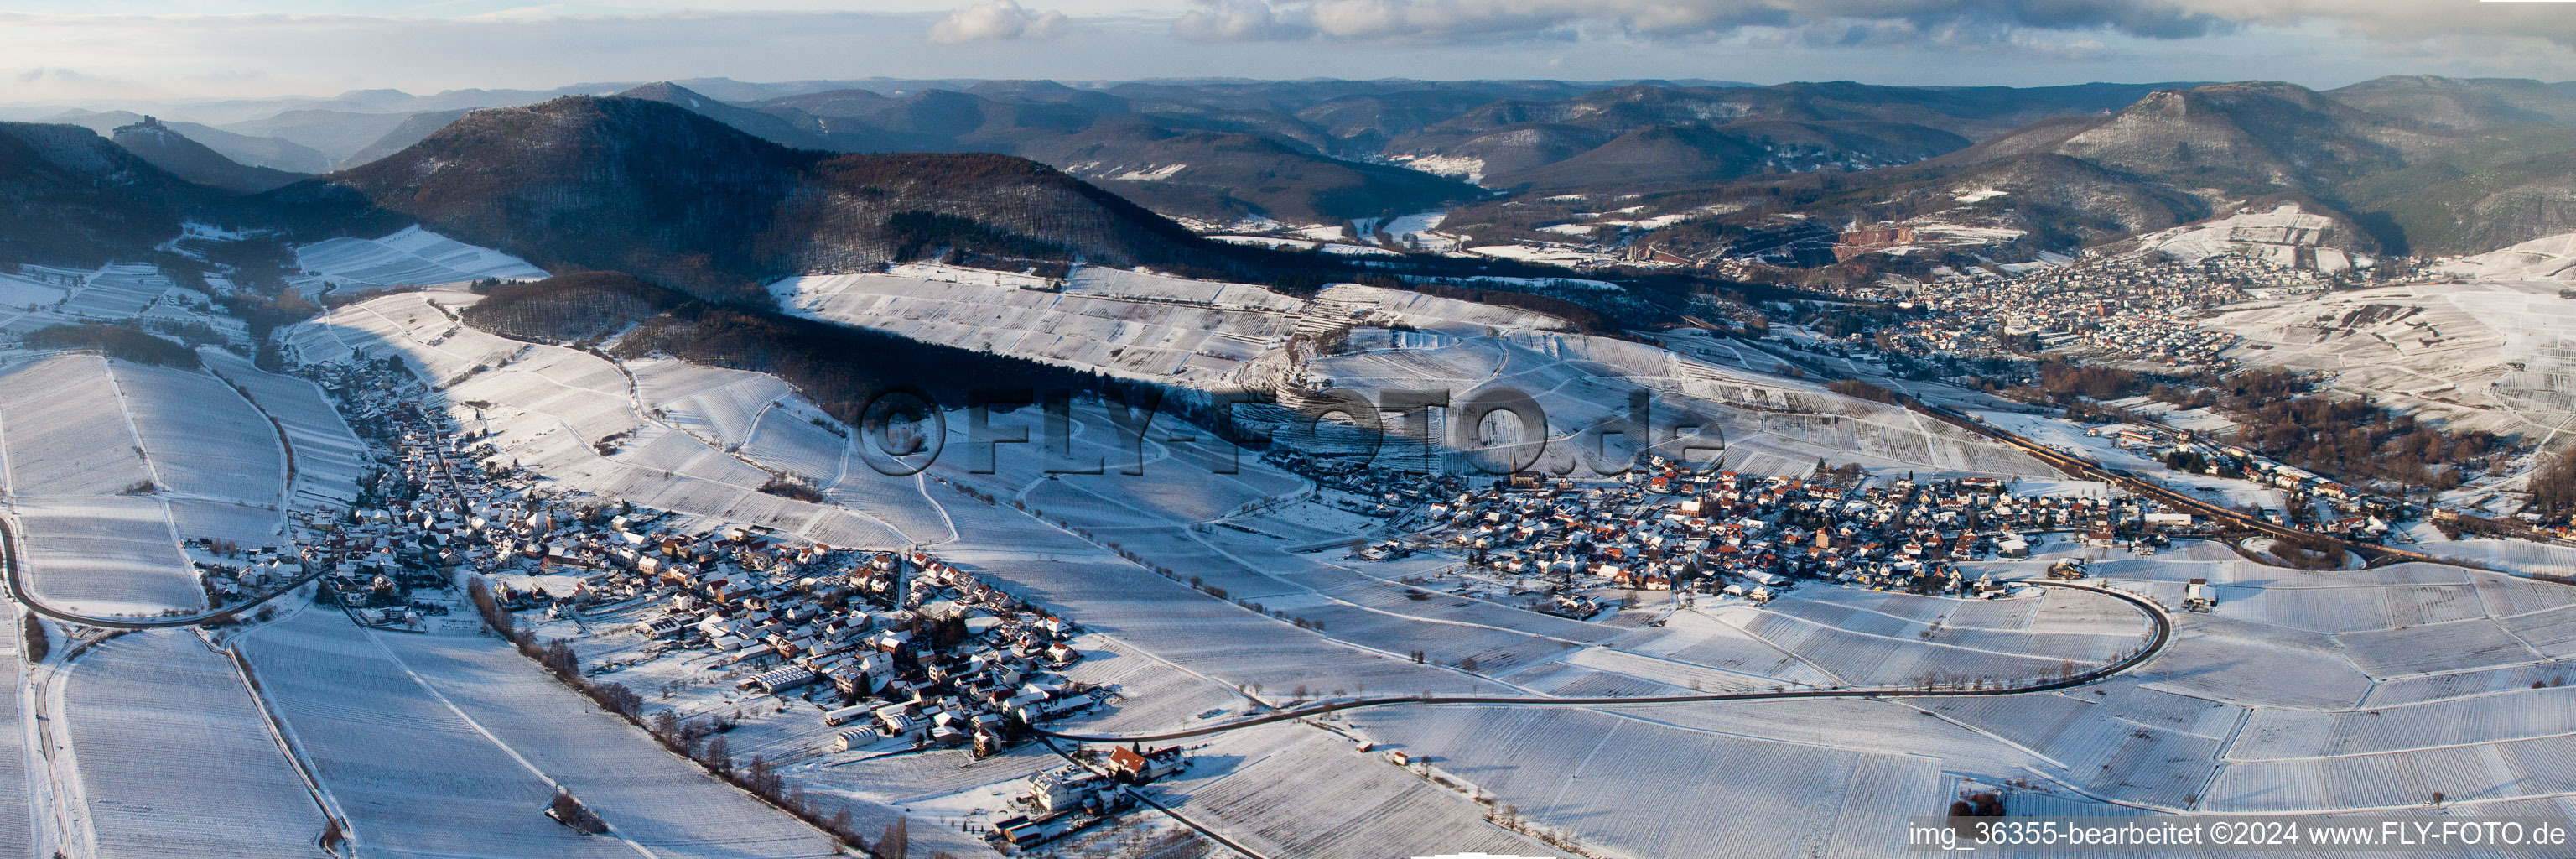 Wintry snowy Panorama from the local area and environment in Birkweiler in the state Rhineland-Palatinate